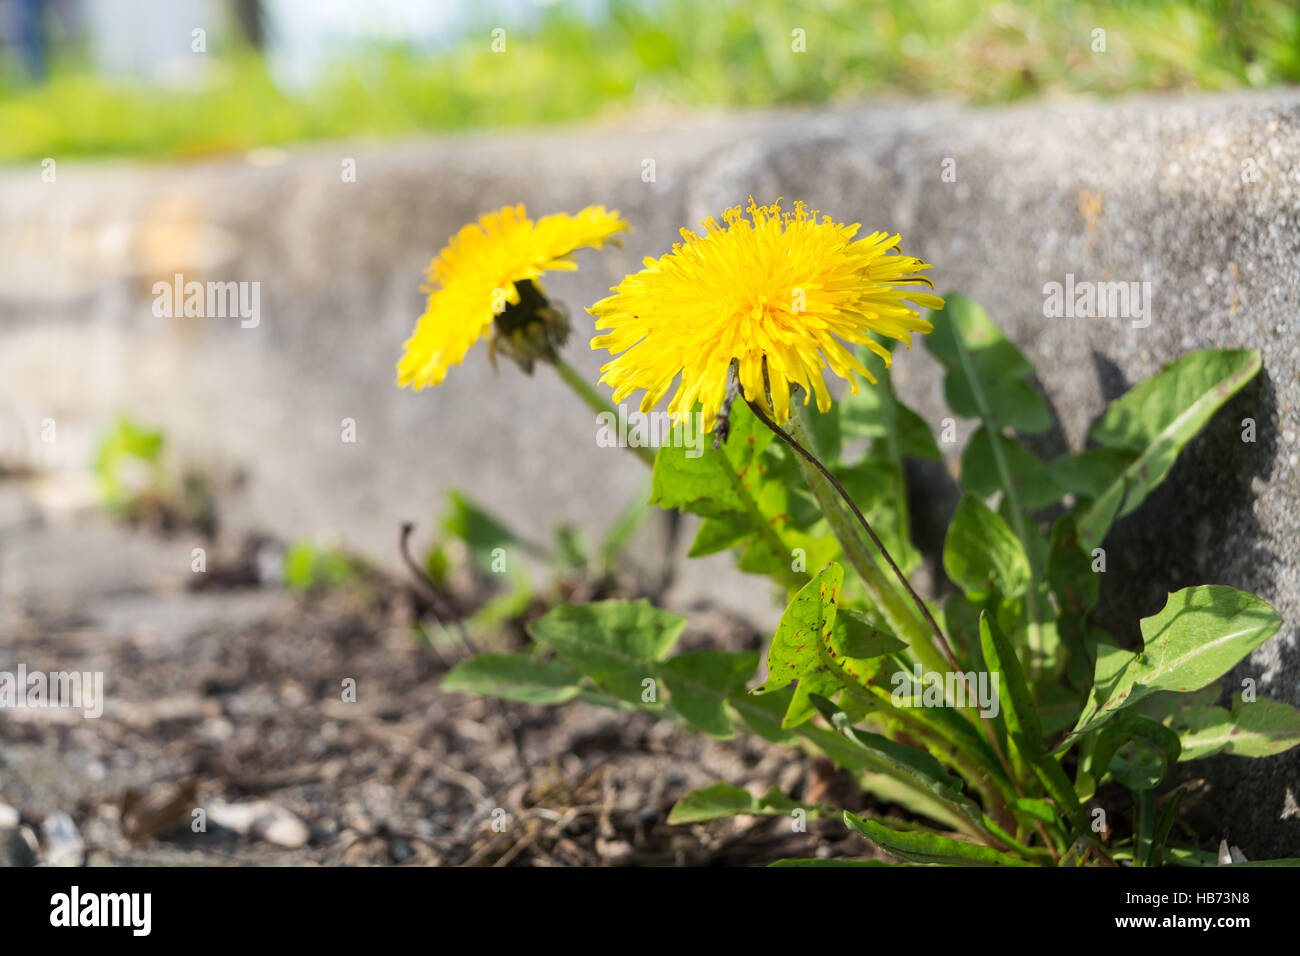 Dandelion at the curb Stock Photo